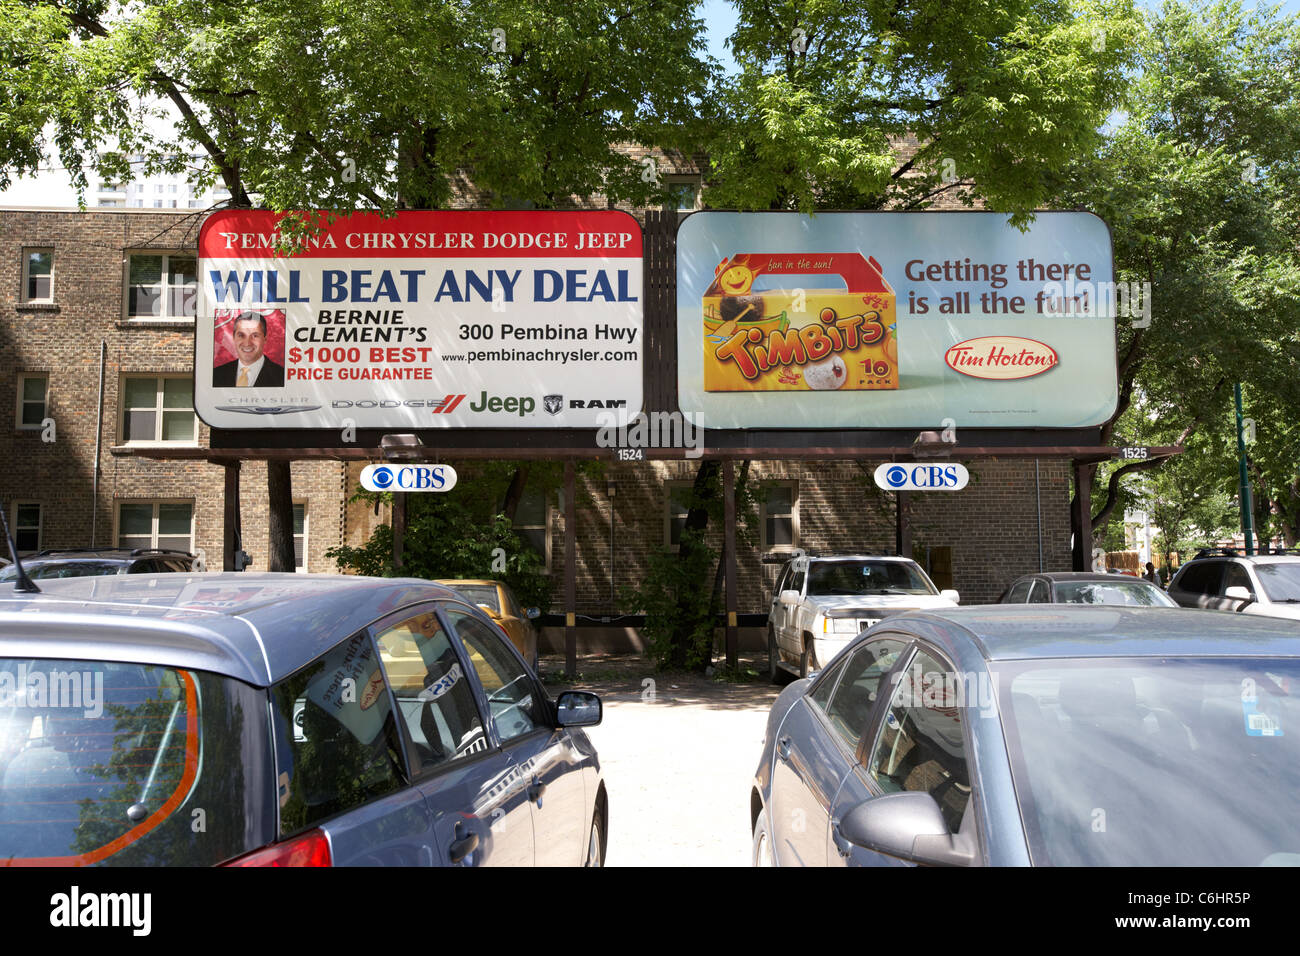 advertising boards for tim hortons and a local car dealer in a car park in winnipeg manitoba canada Stock Photo